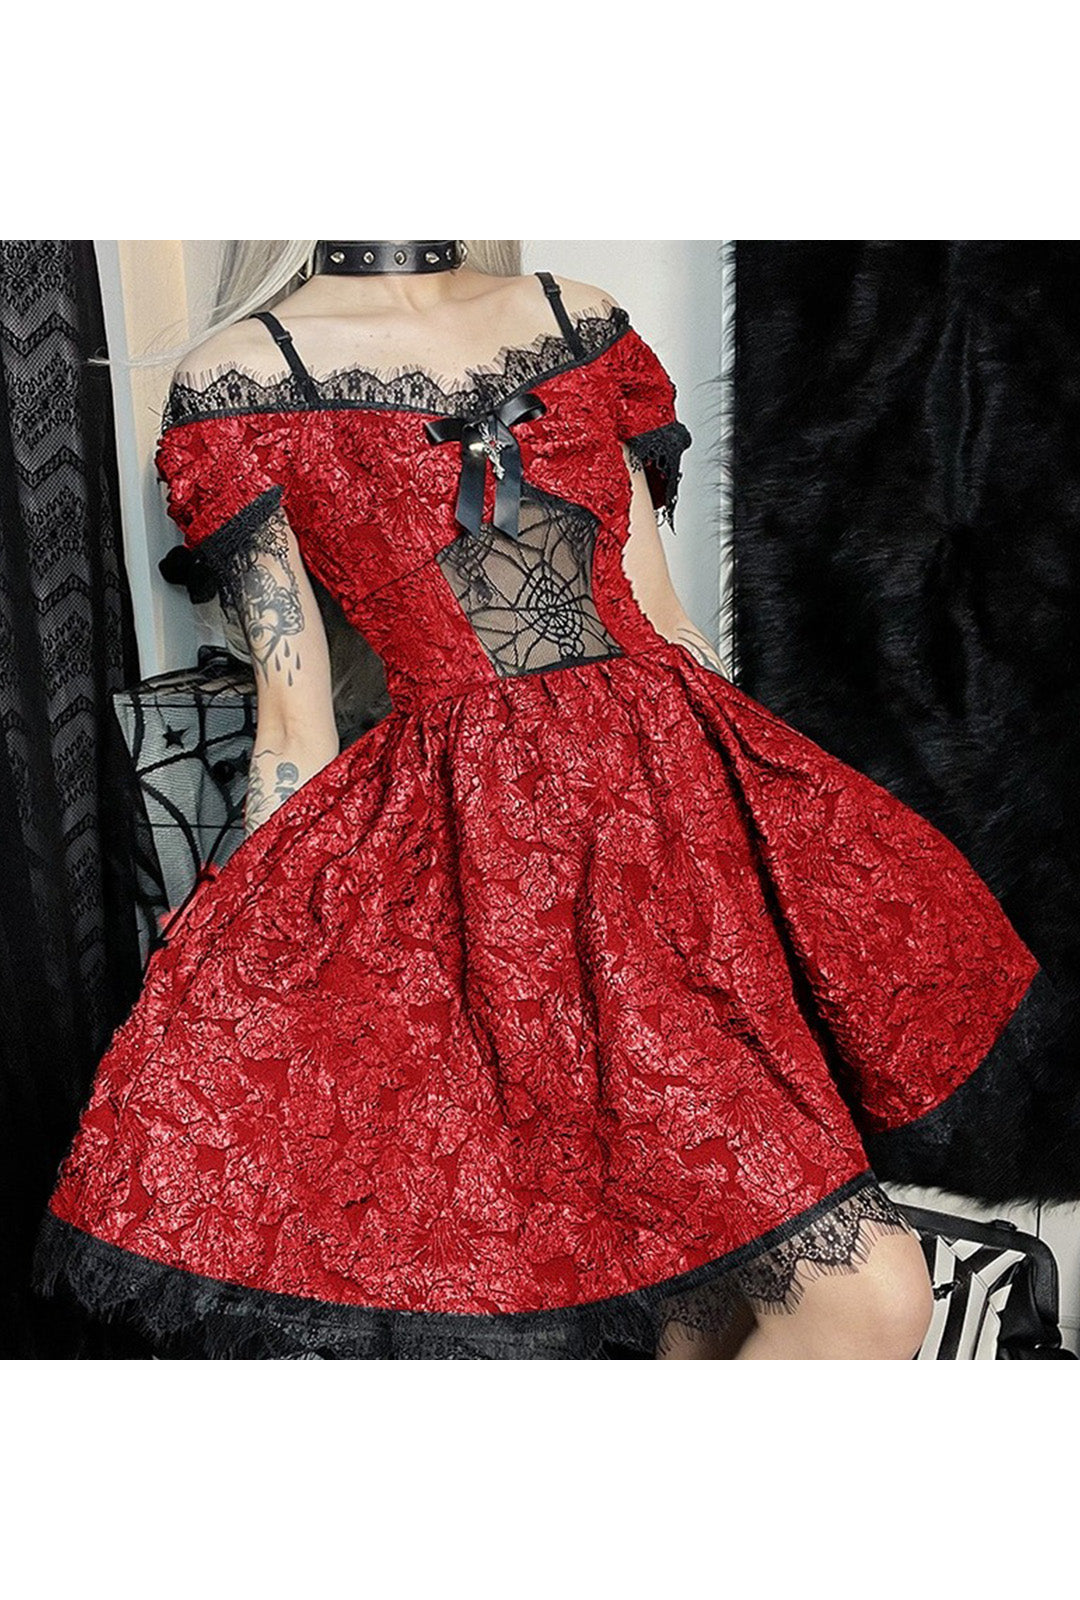 Red Gothic Lace Dress